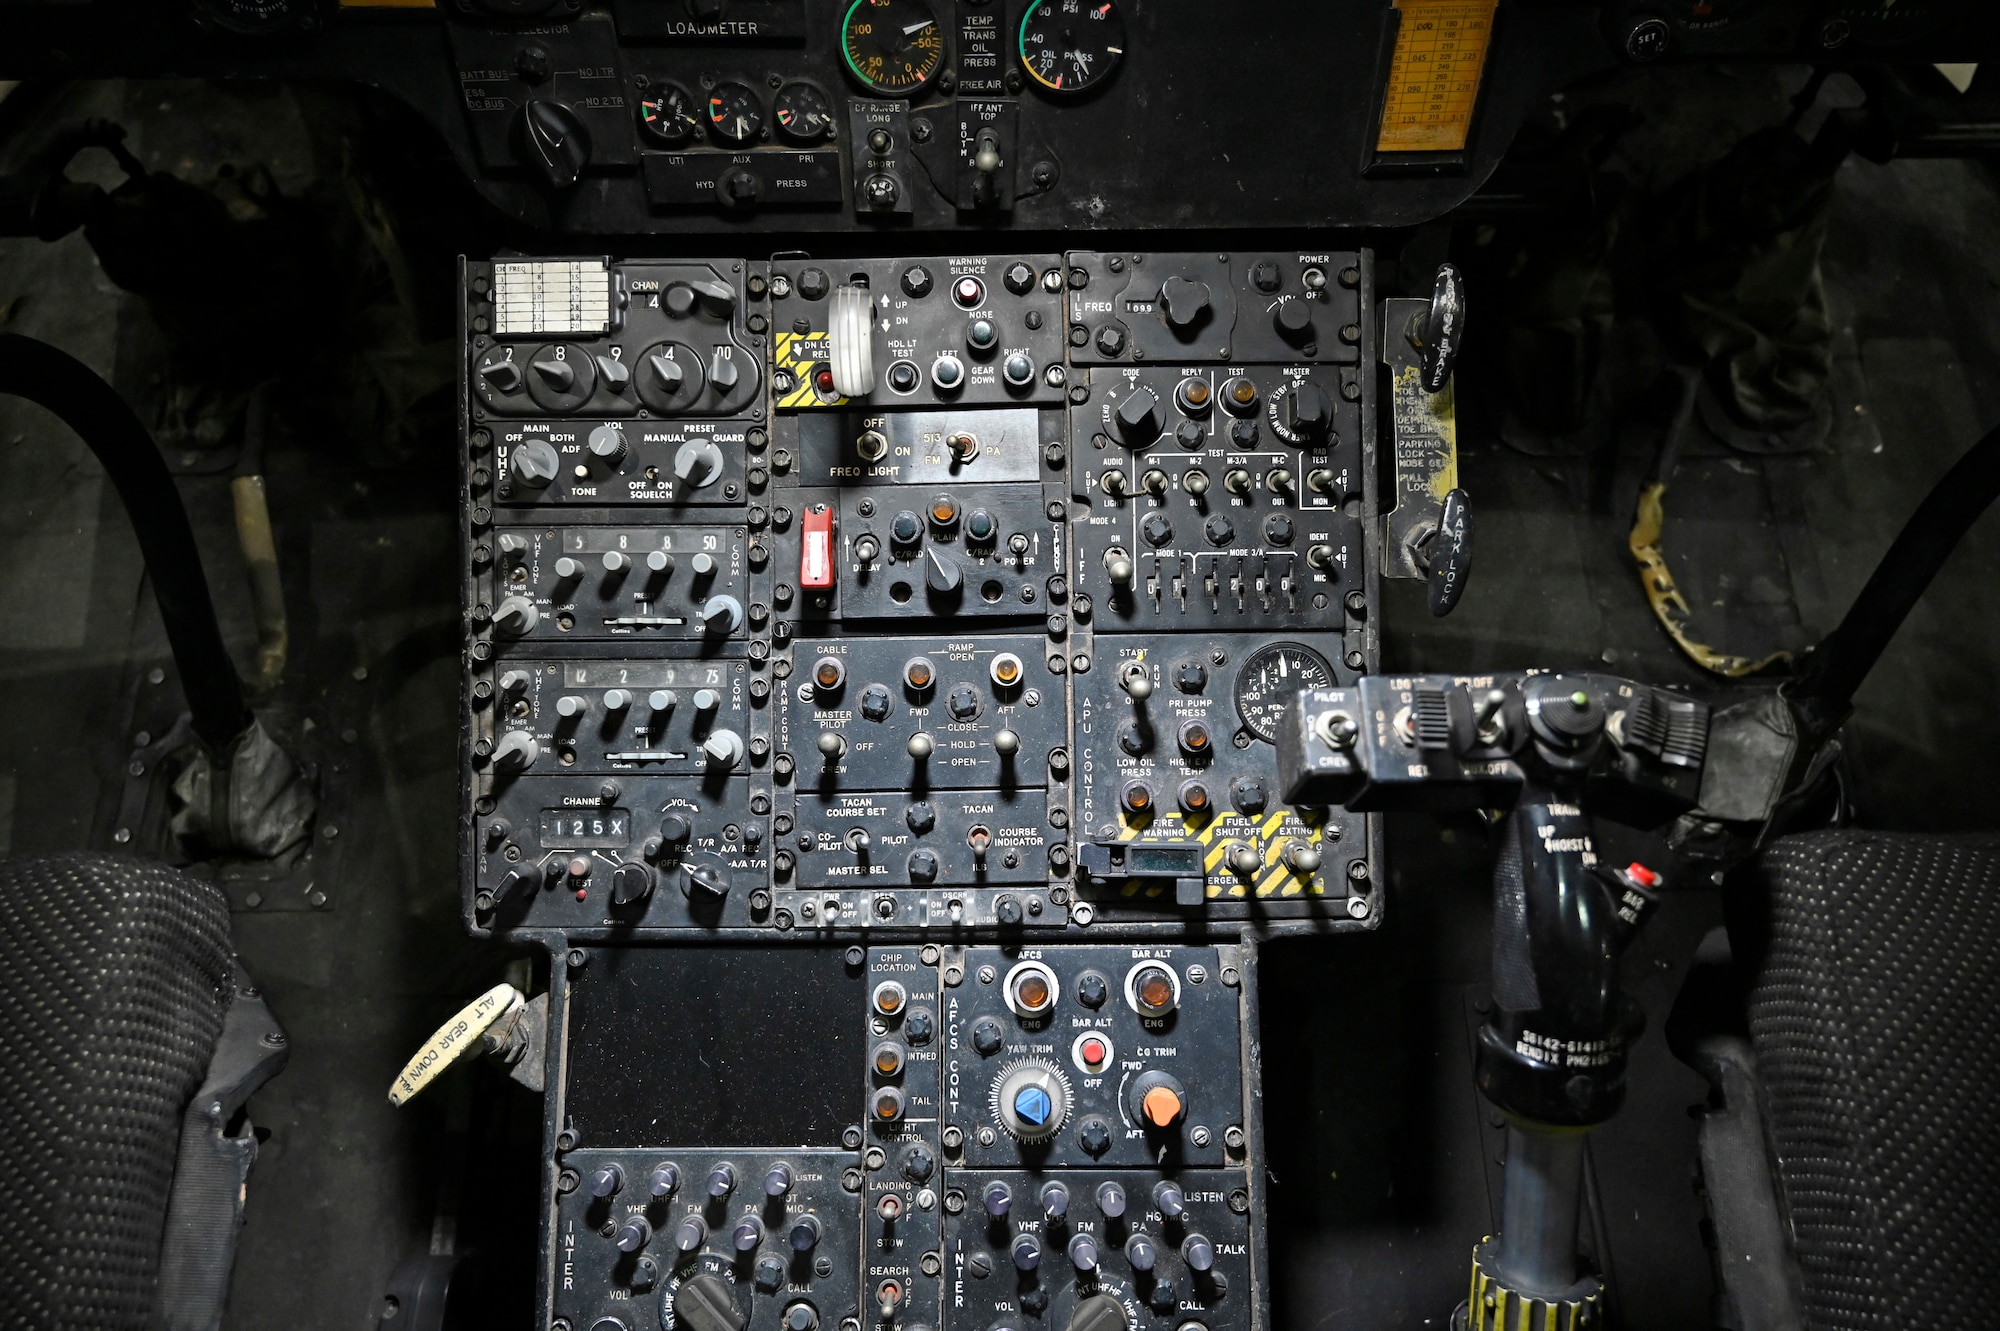 Interior views of the Sikorsky CH-3E Black Mariah helicopter.